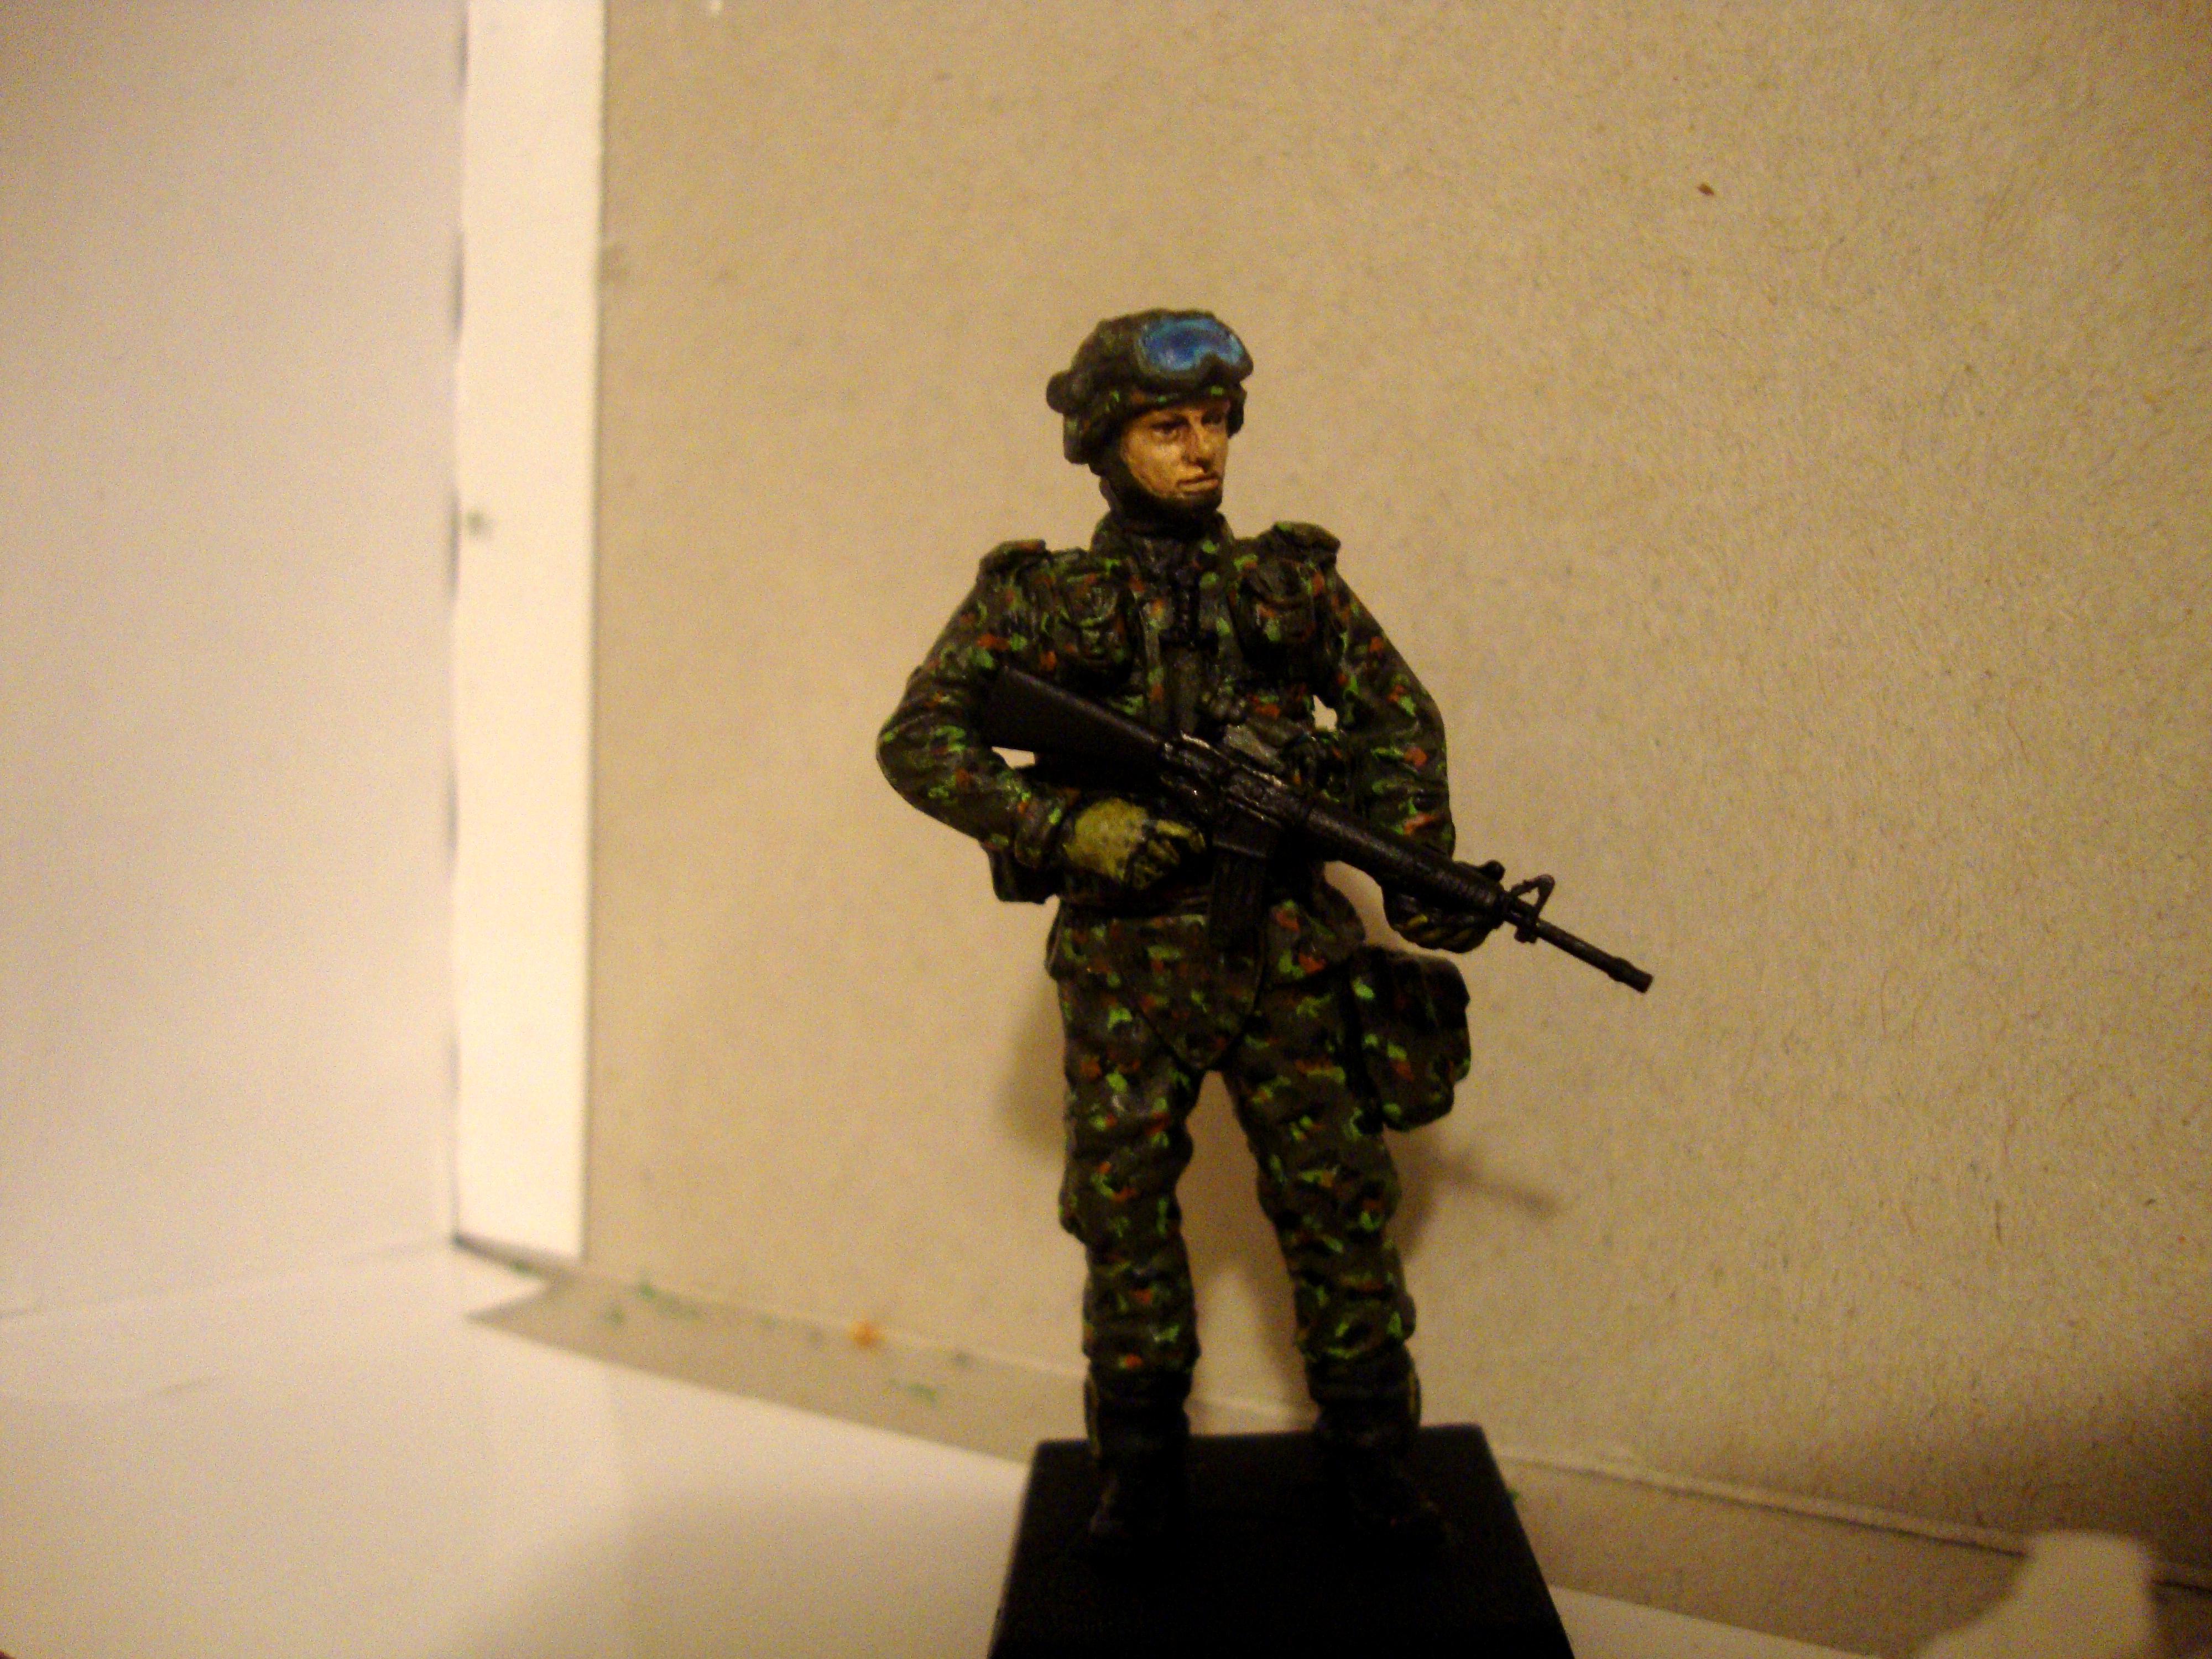 Cadians, Camouflage, Canada, Canadian, Infantry, Modern